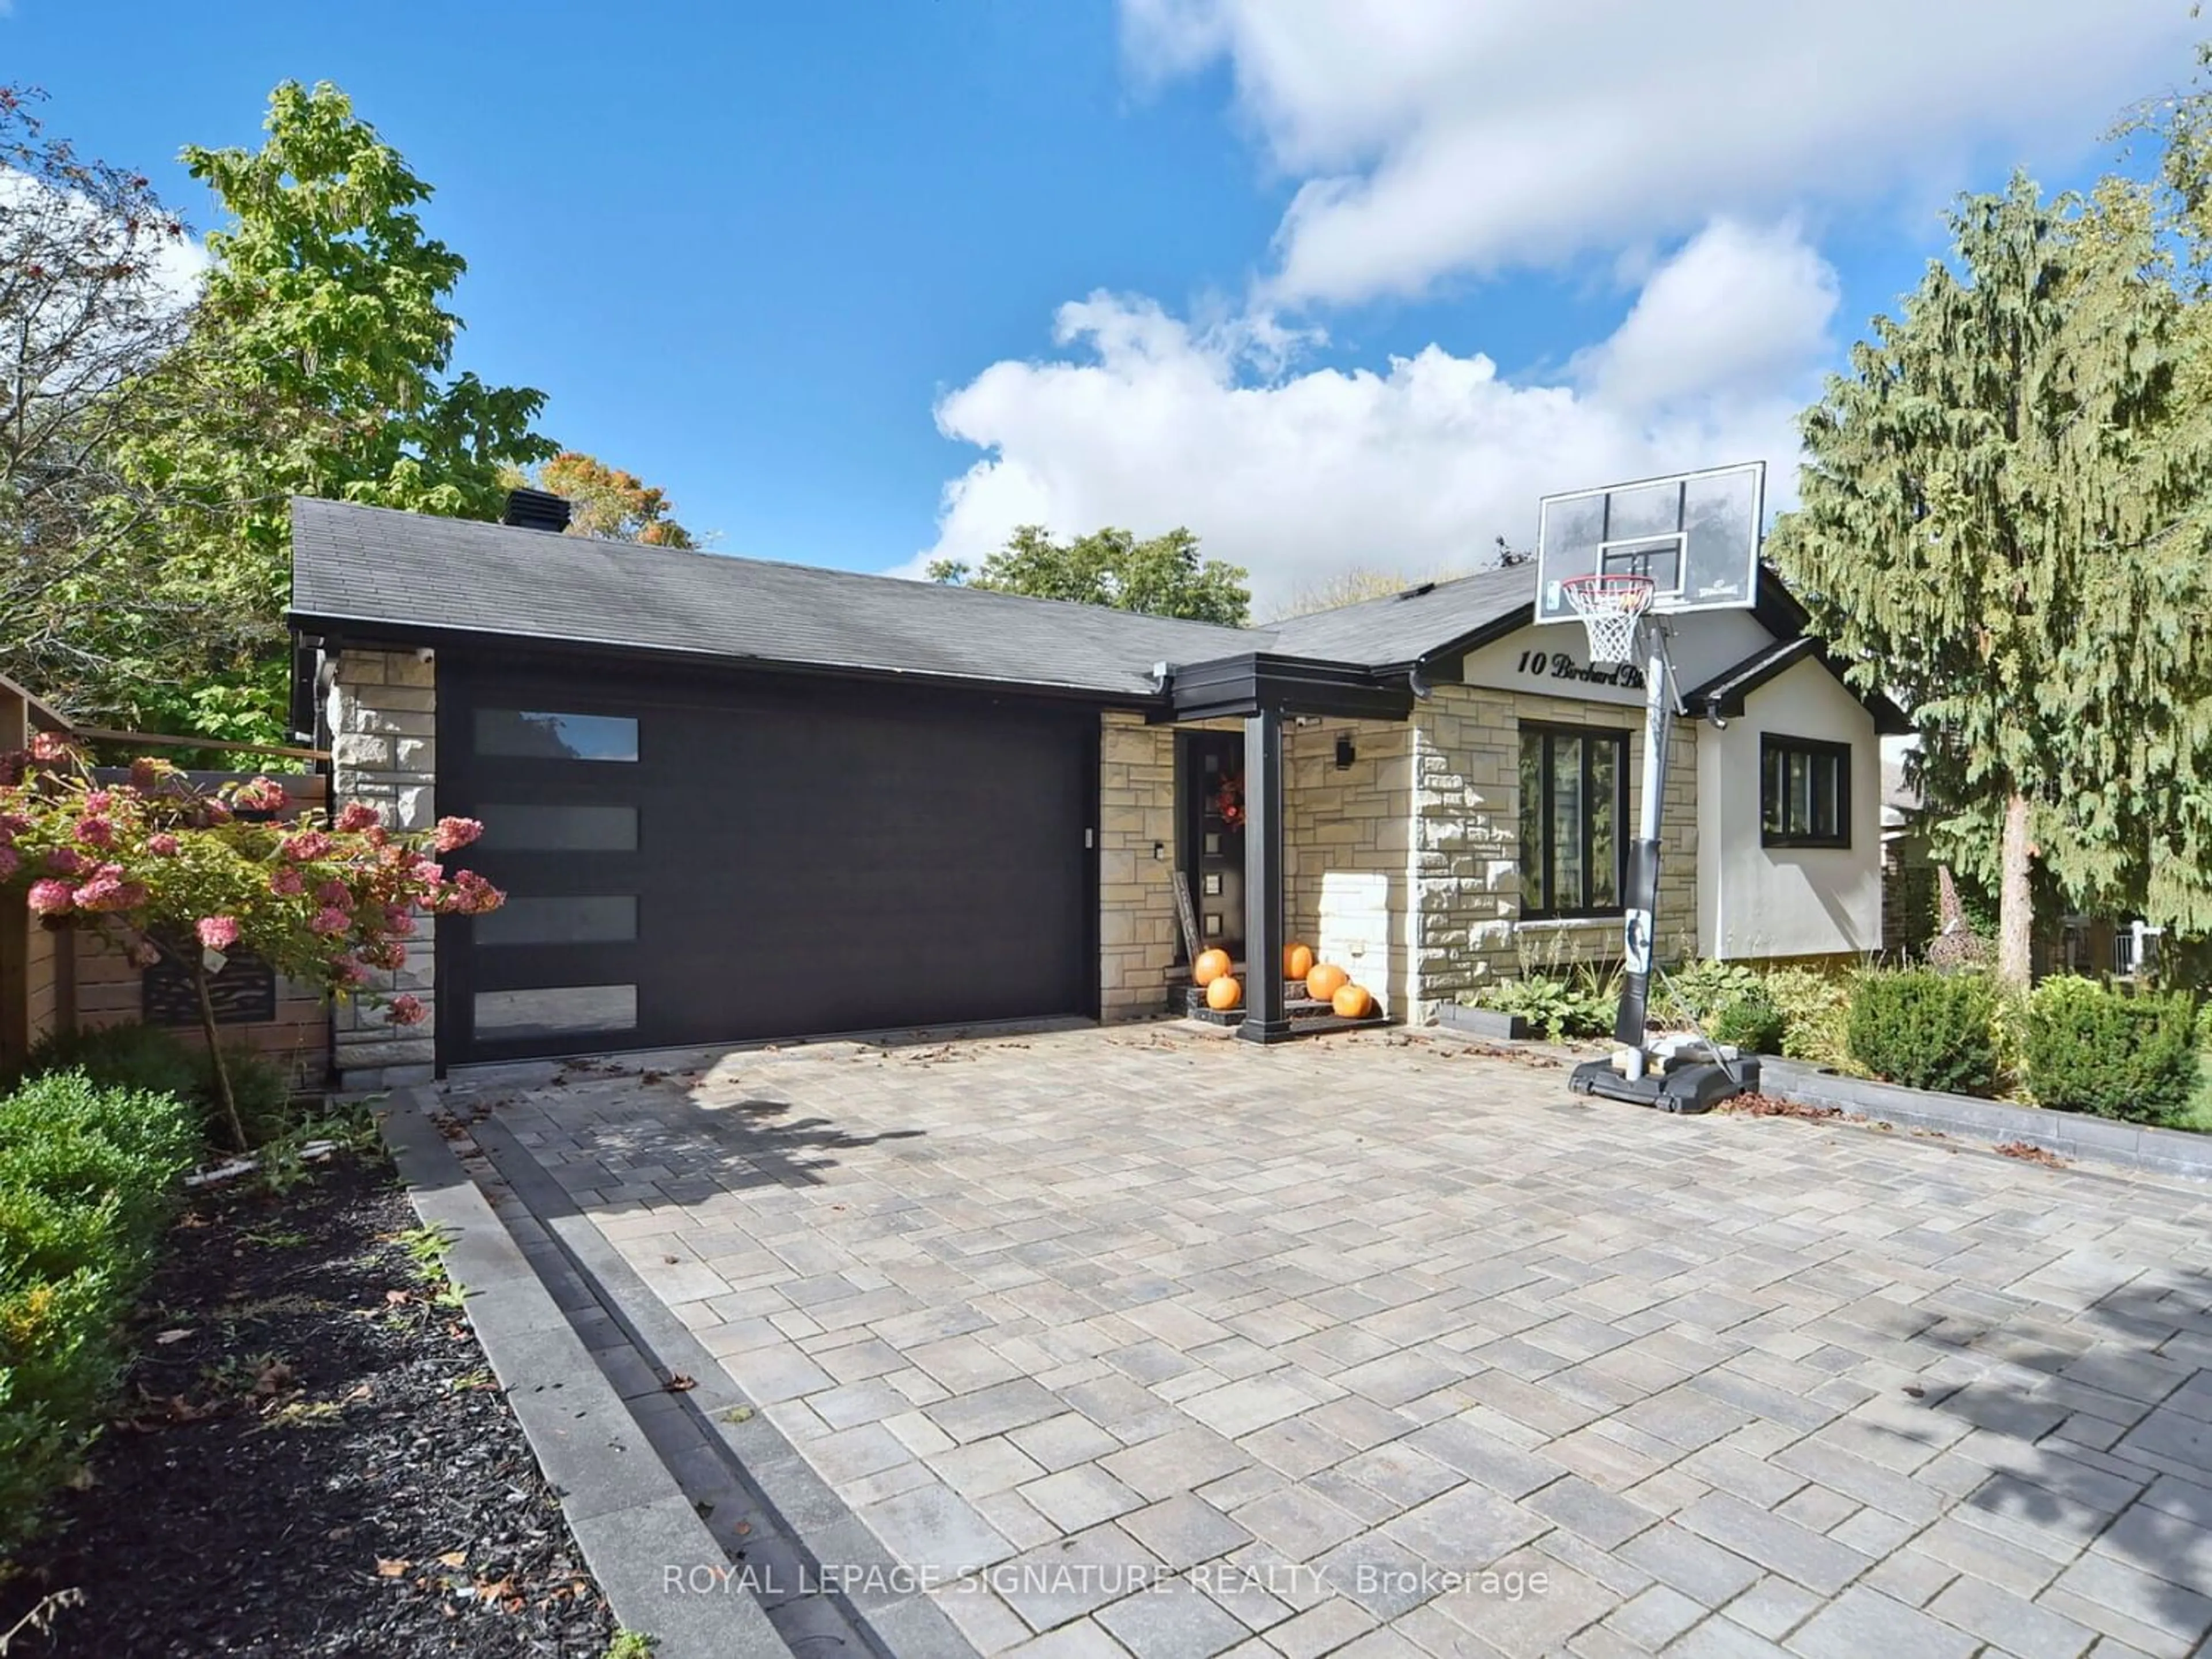 Home with brick exterior material for 10 Birchard Blvd, East Gwillimbury Ontario L0G 1M0